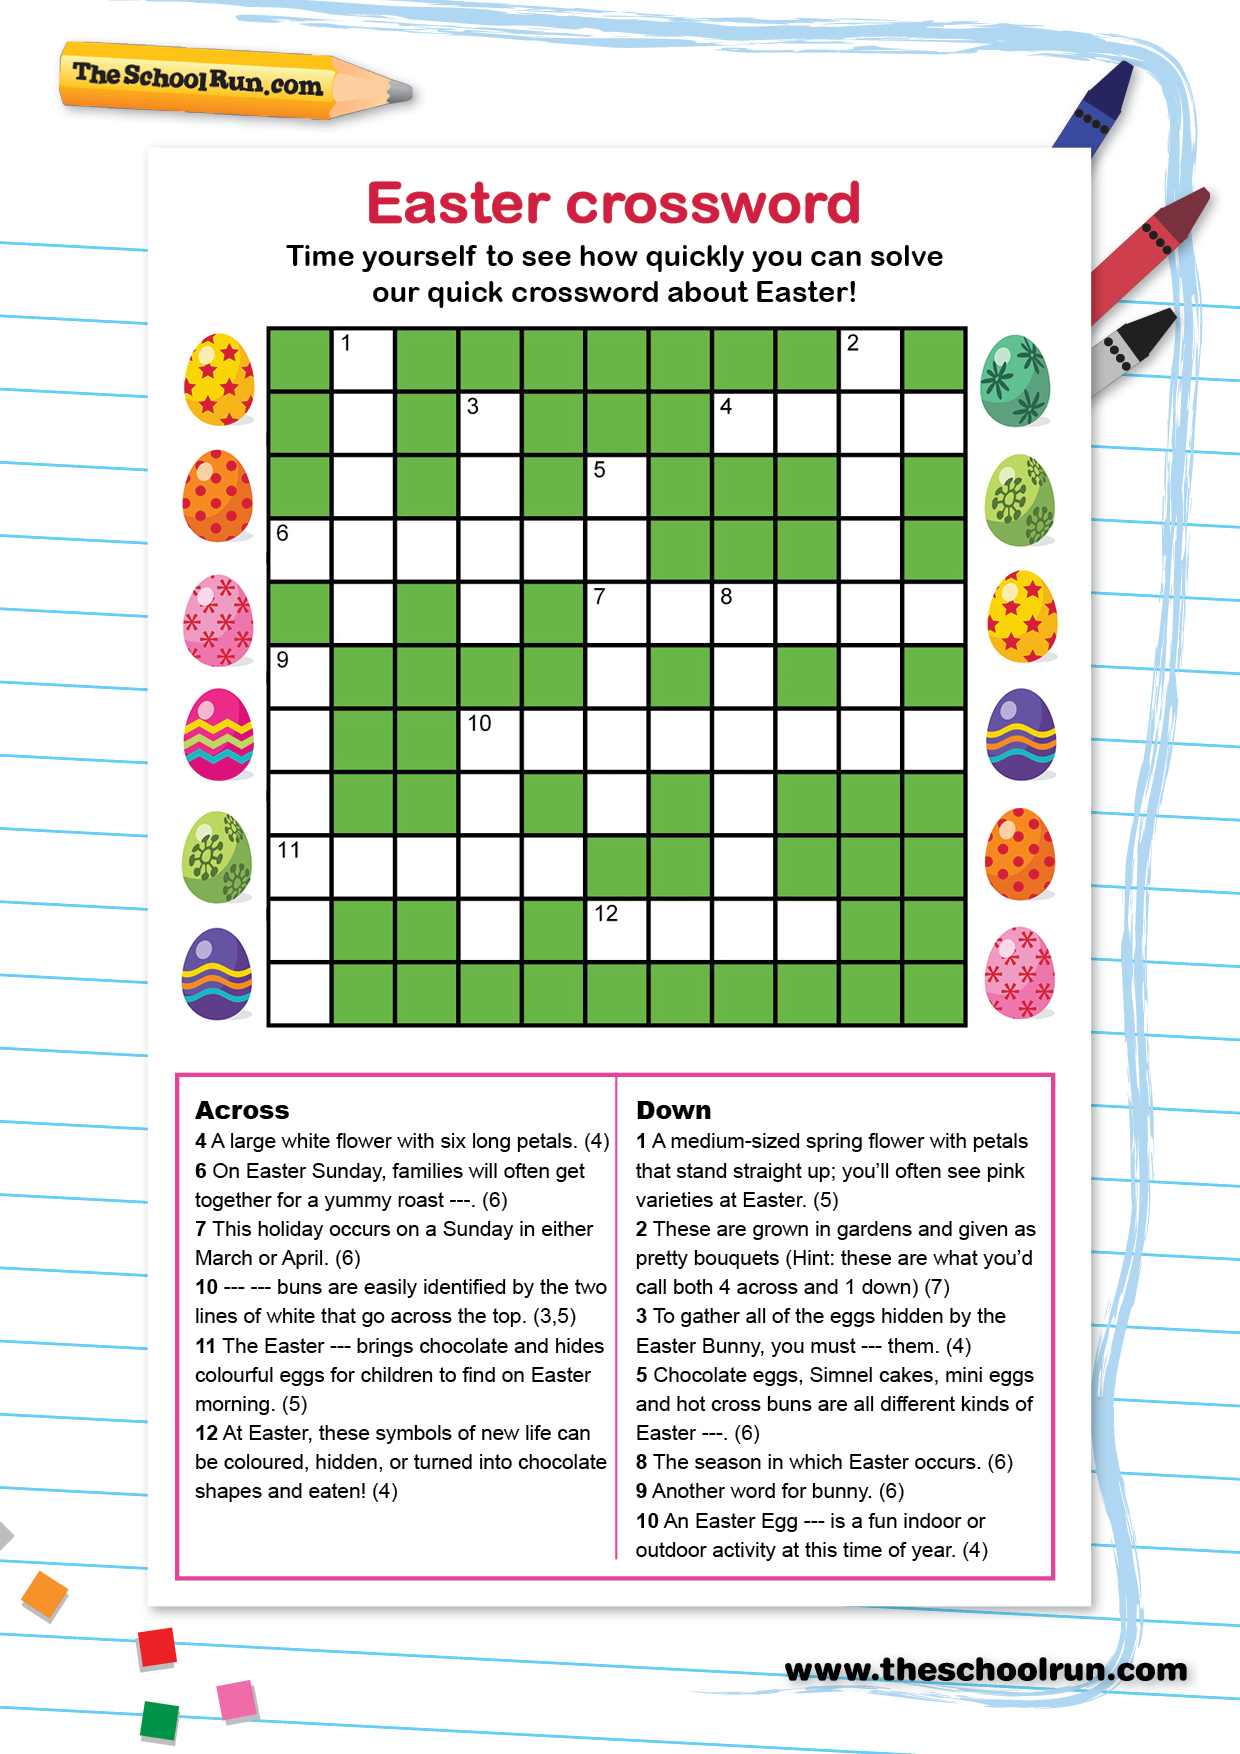 Word Puzzles For Primary School Children | Theschoolrun - Printable Word Puzzles For 7 Year Olds